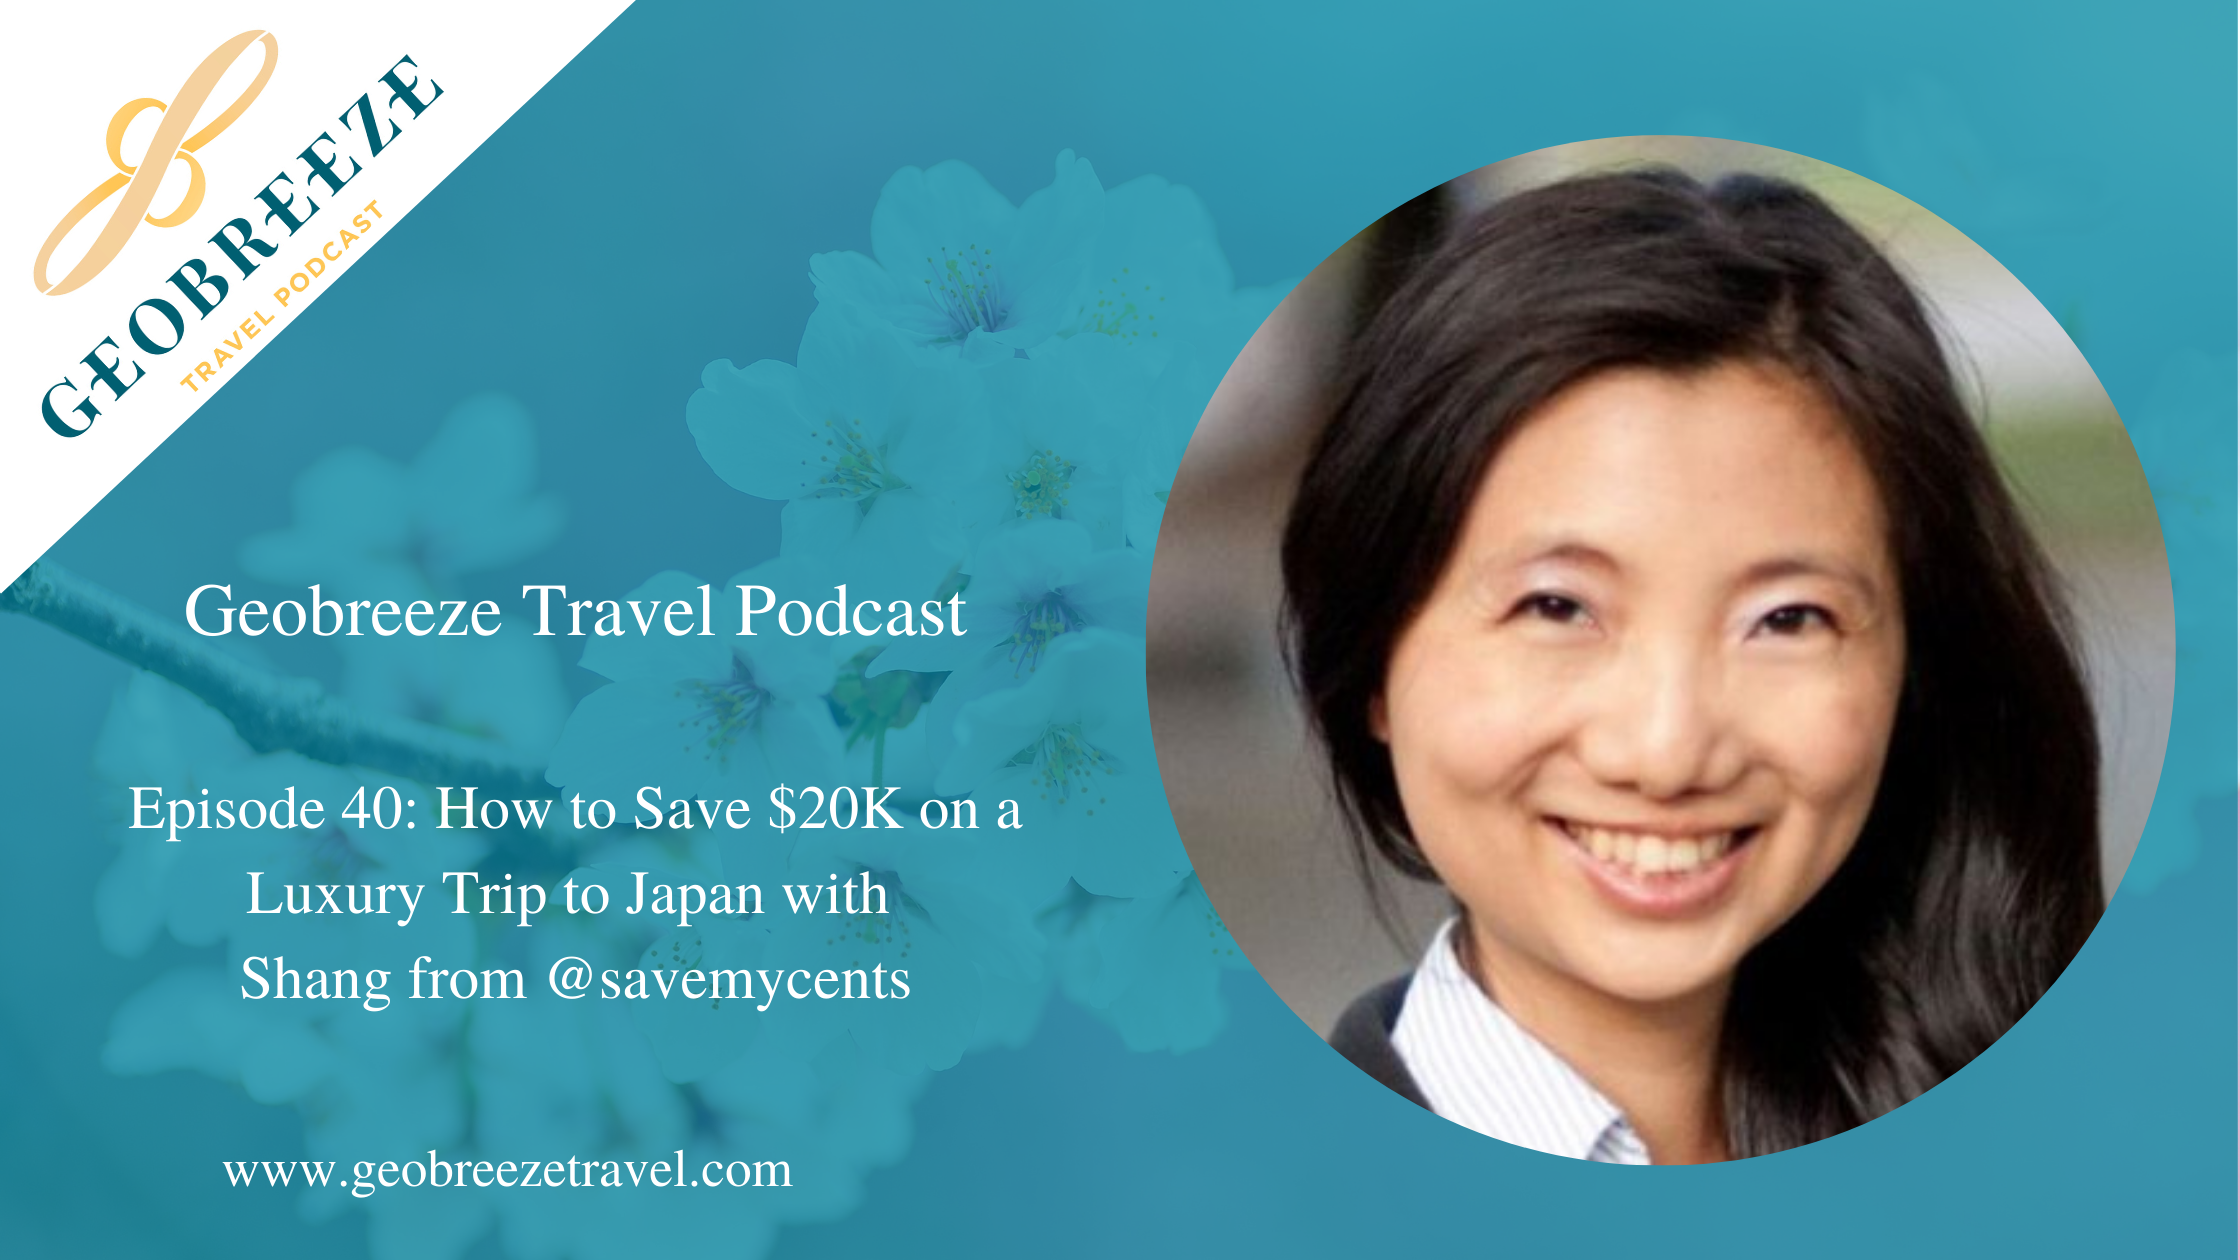 Episode 40: How to Save $20K on a Luxury Trip to Japan with Shang from @savemycents